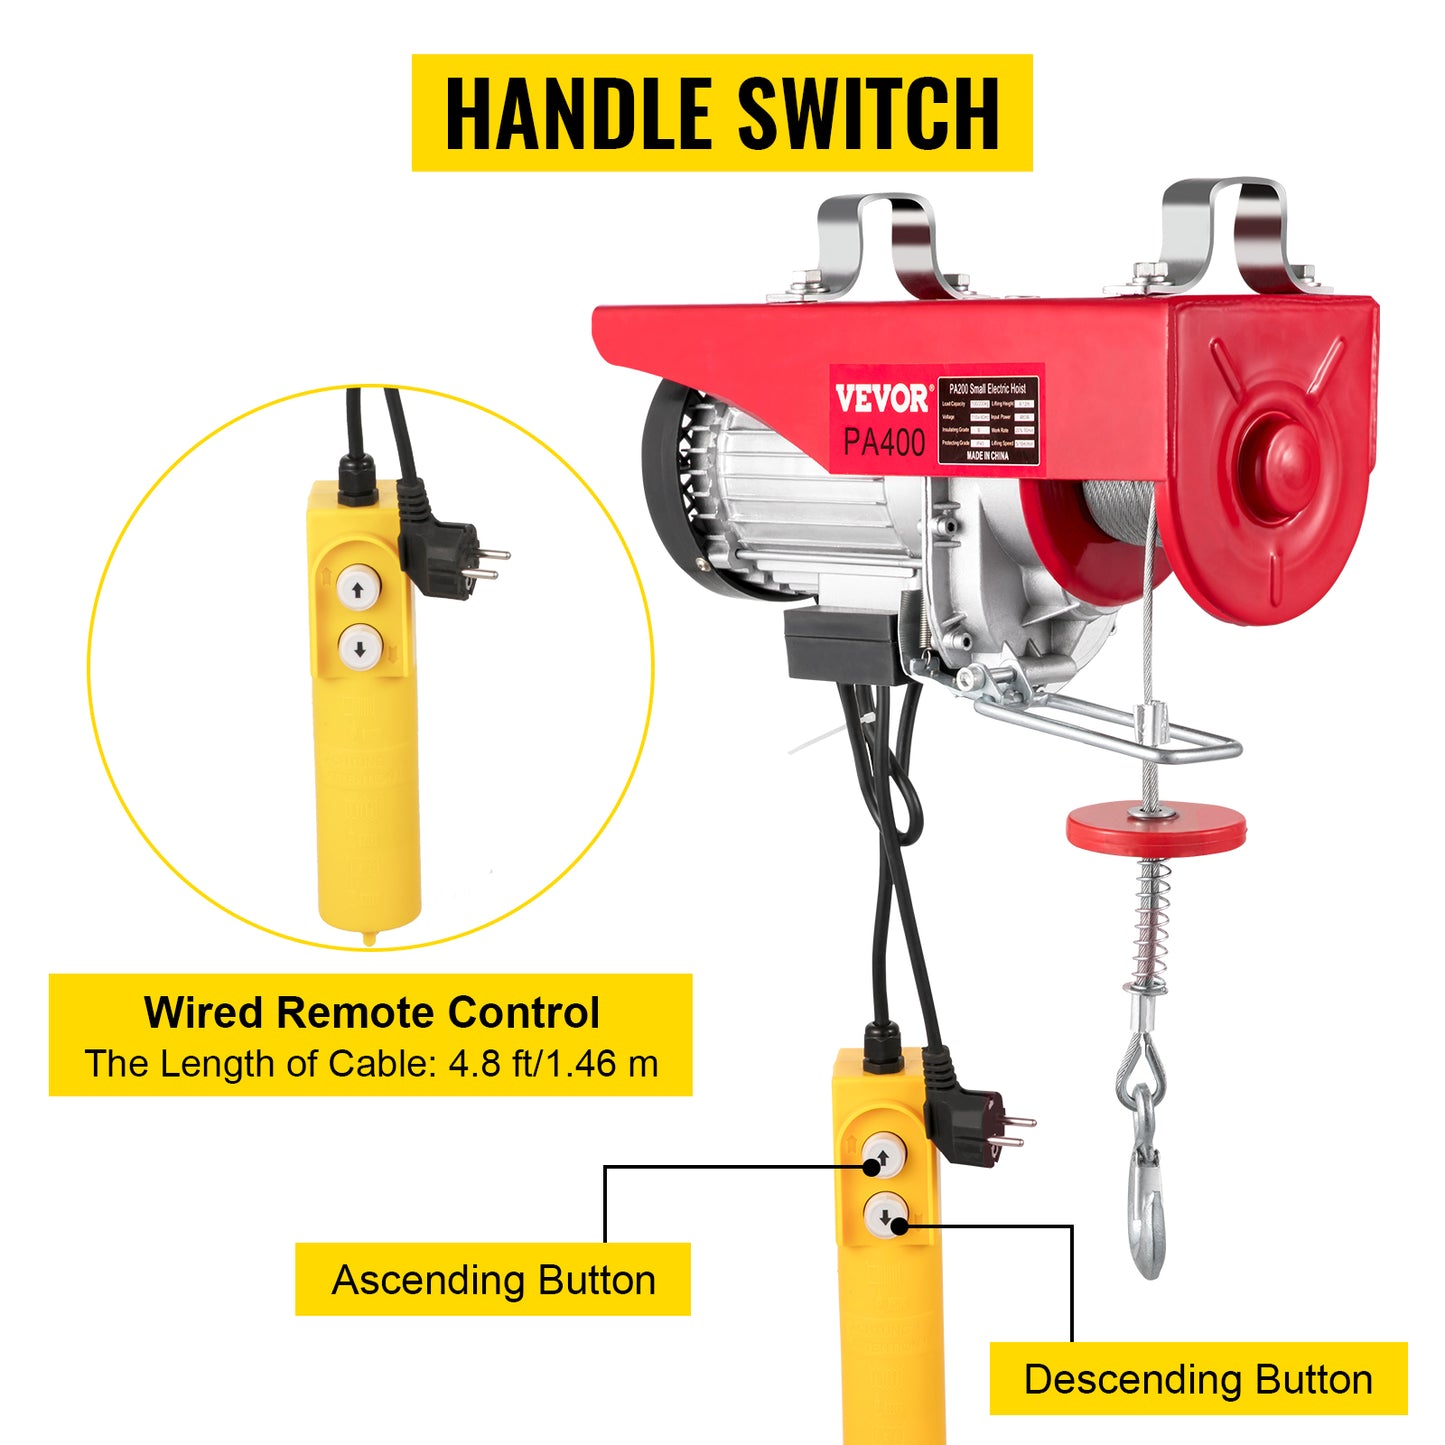 880 lbs / 400 kg Portable Electric Hoist Crane: Garage Winch with Wired Remote & Limit Switch